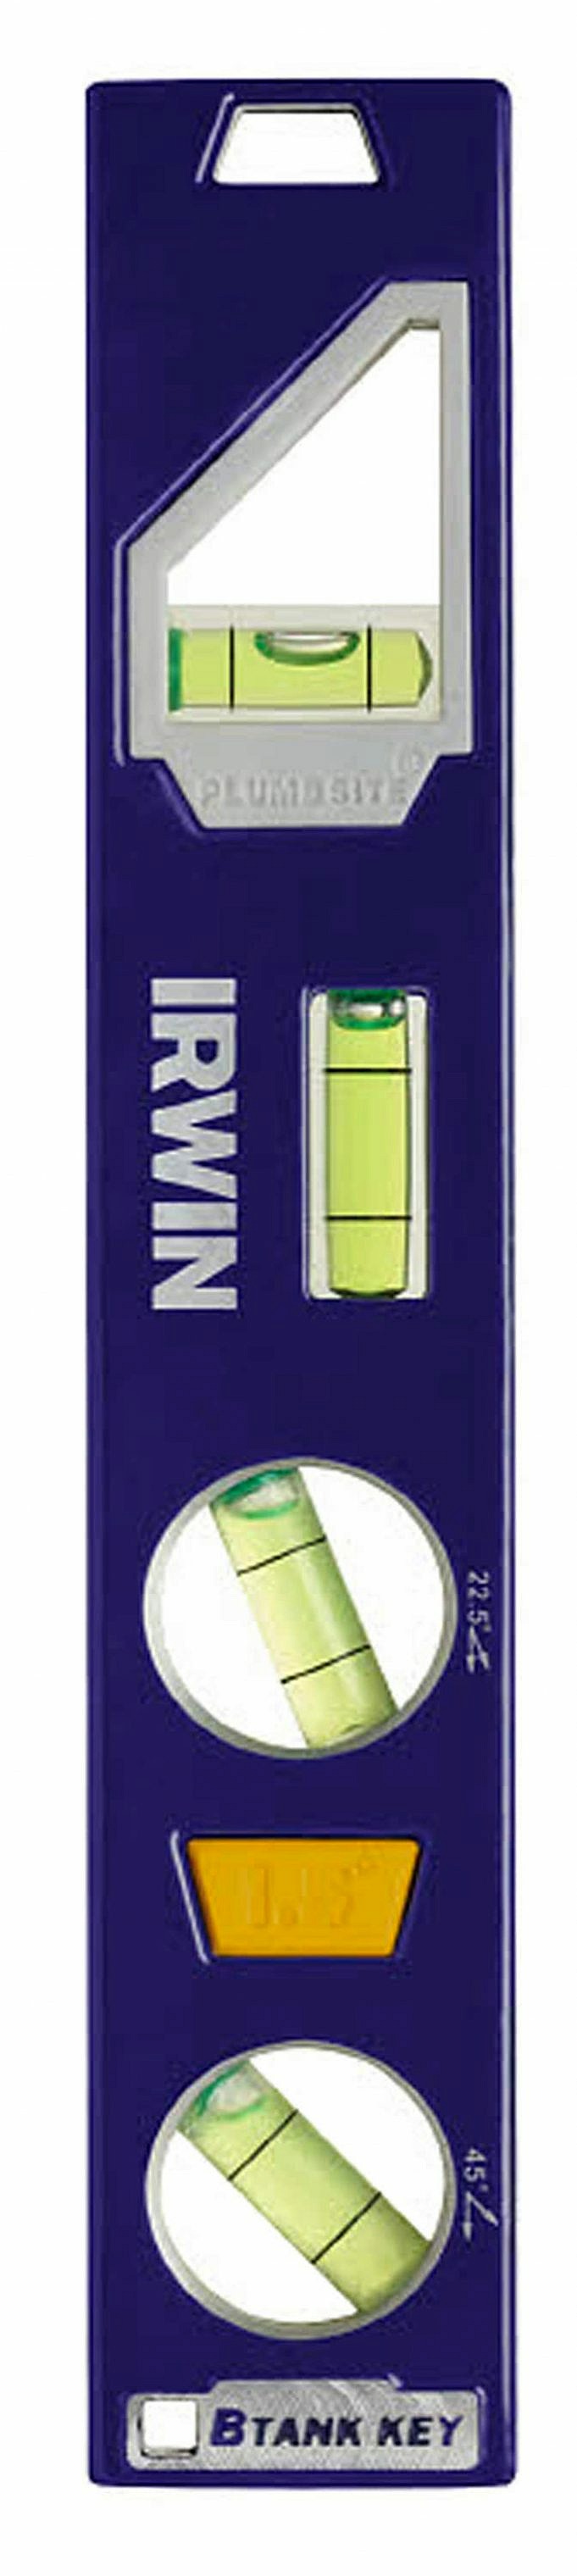 Irwin 250 Series 23 Cm Magnetic Torpedo Level Review